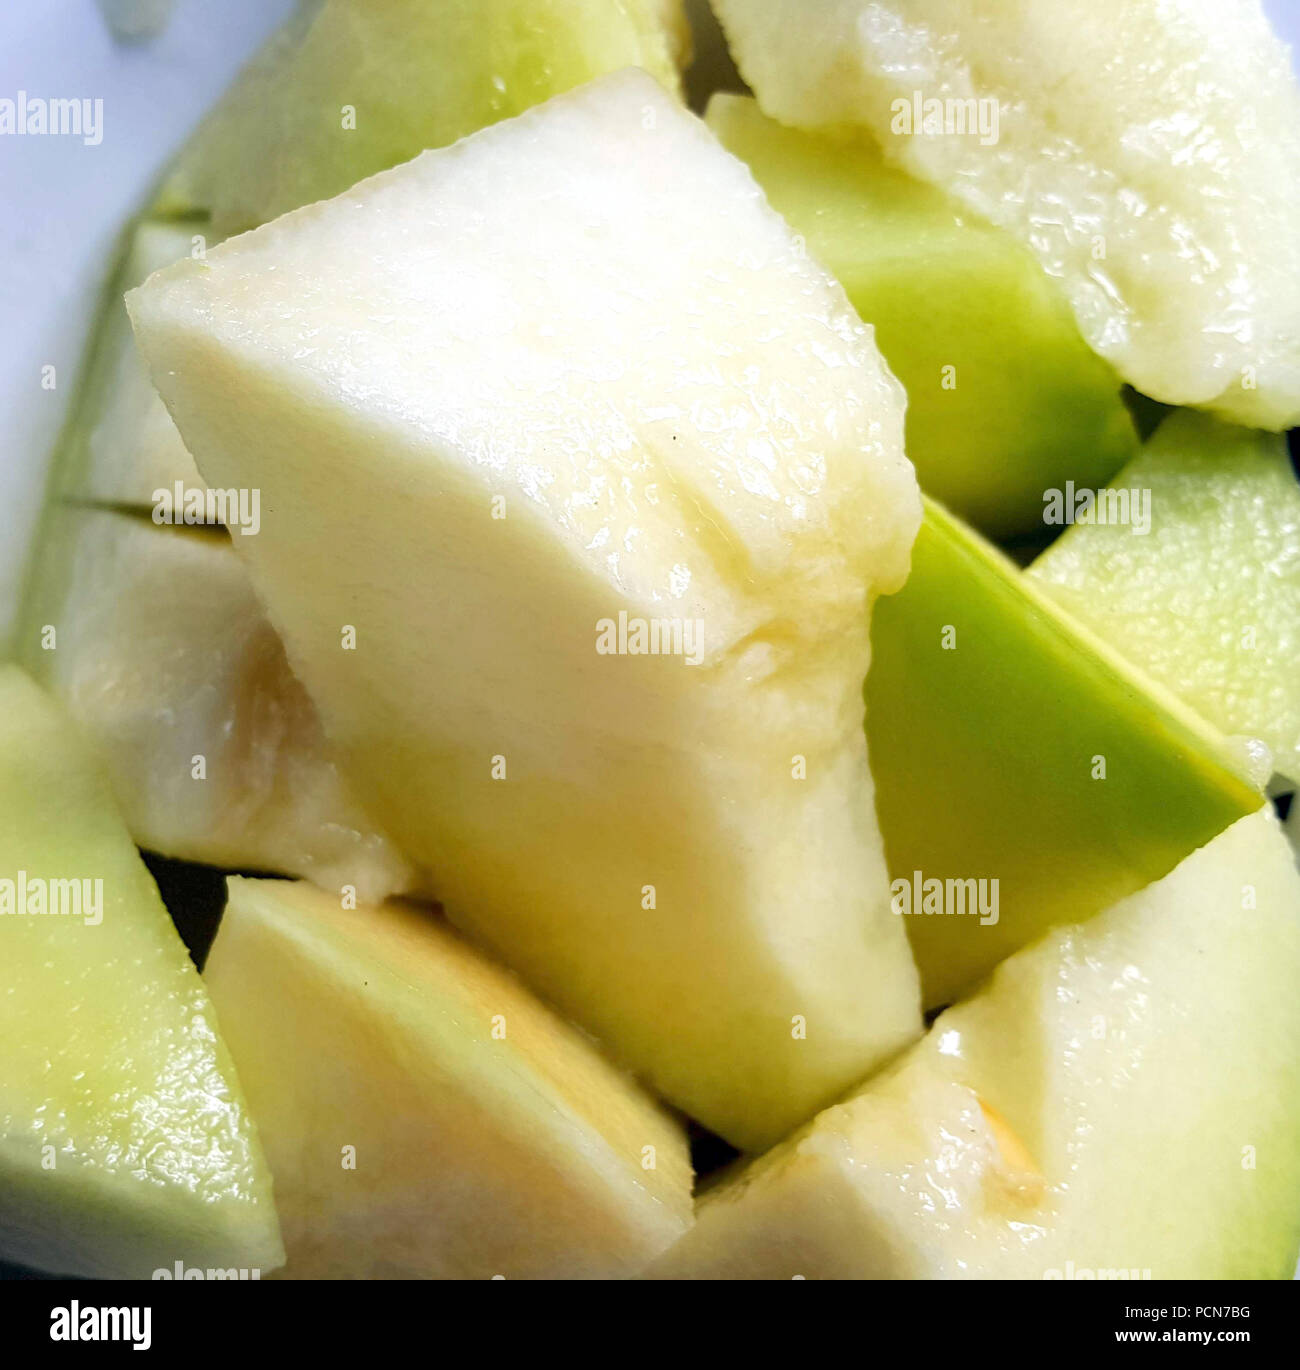 slices of a juicy melon, image of a Stock Photo